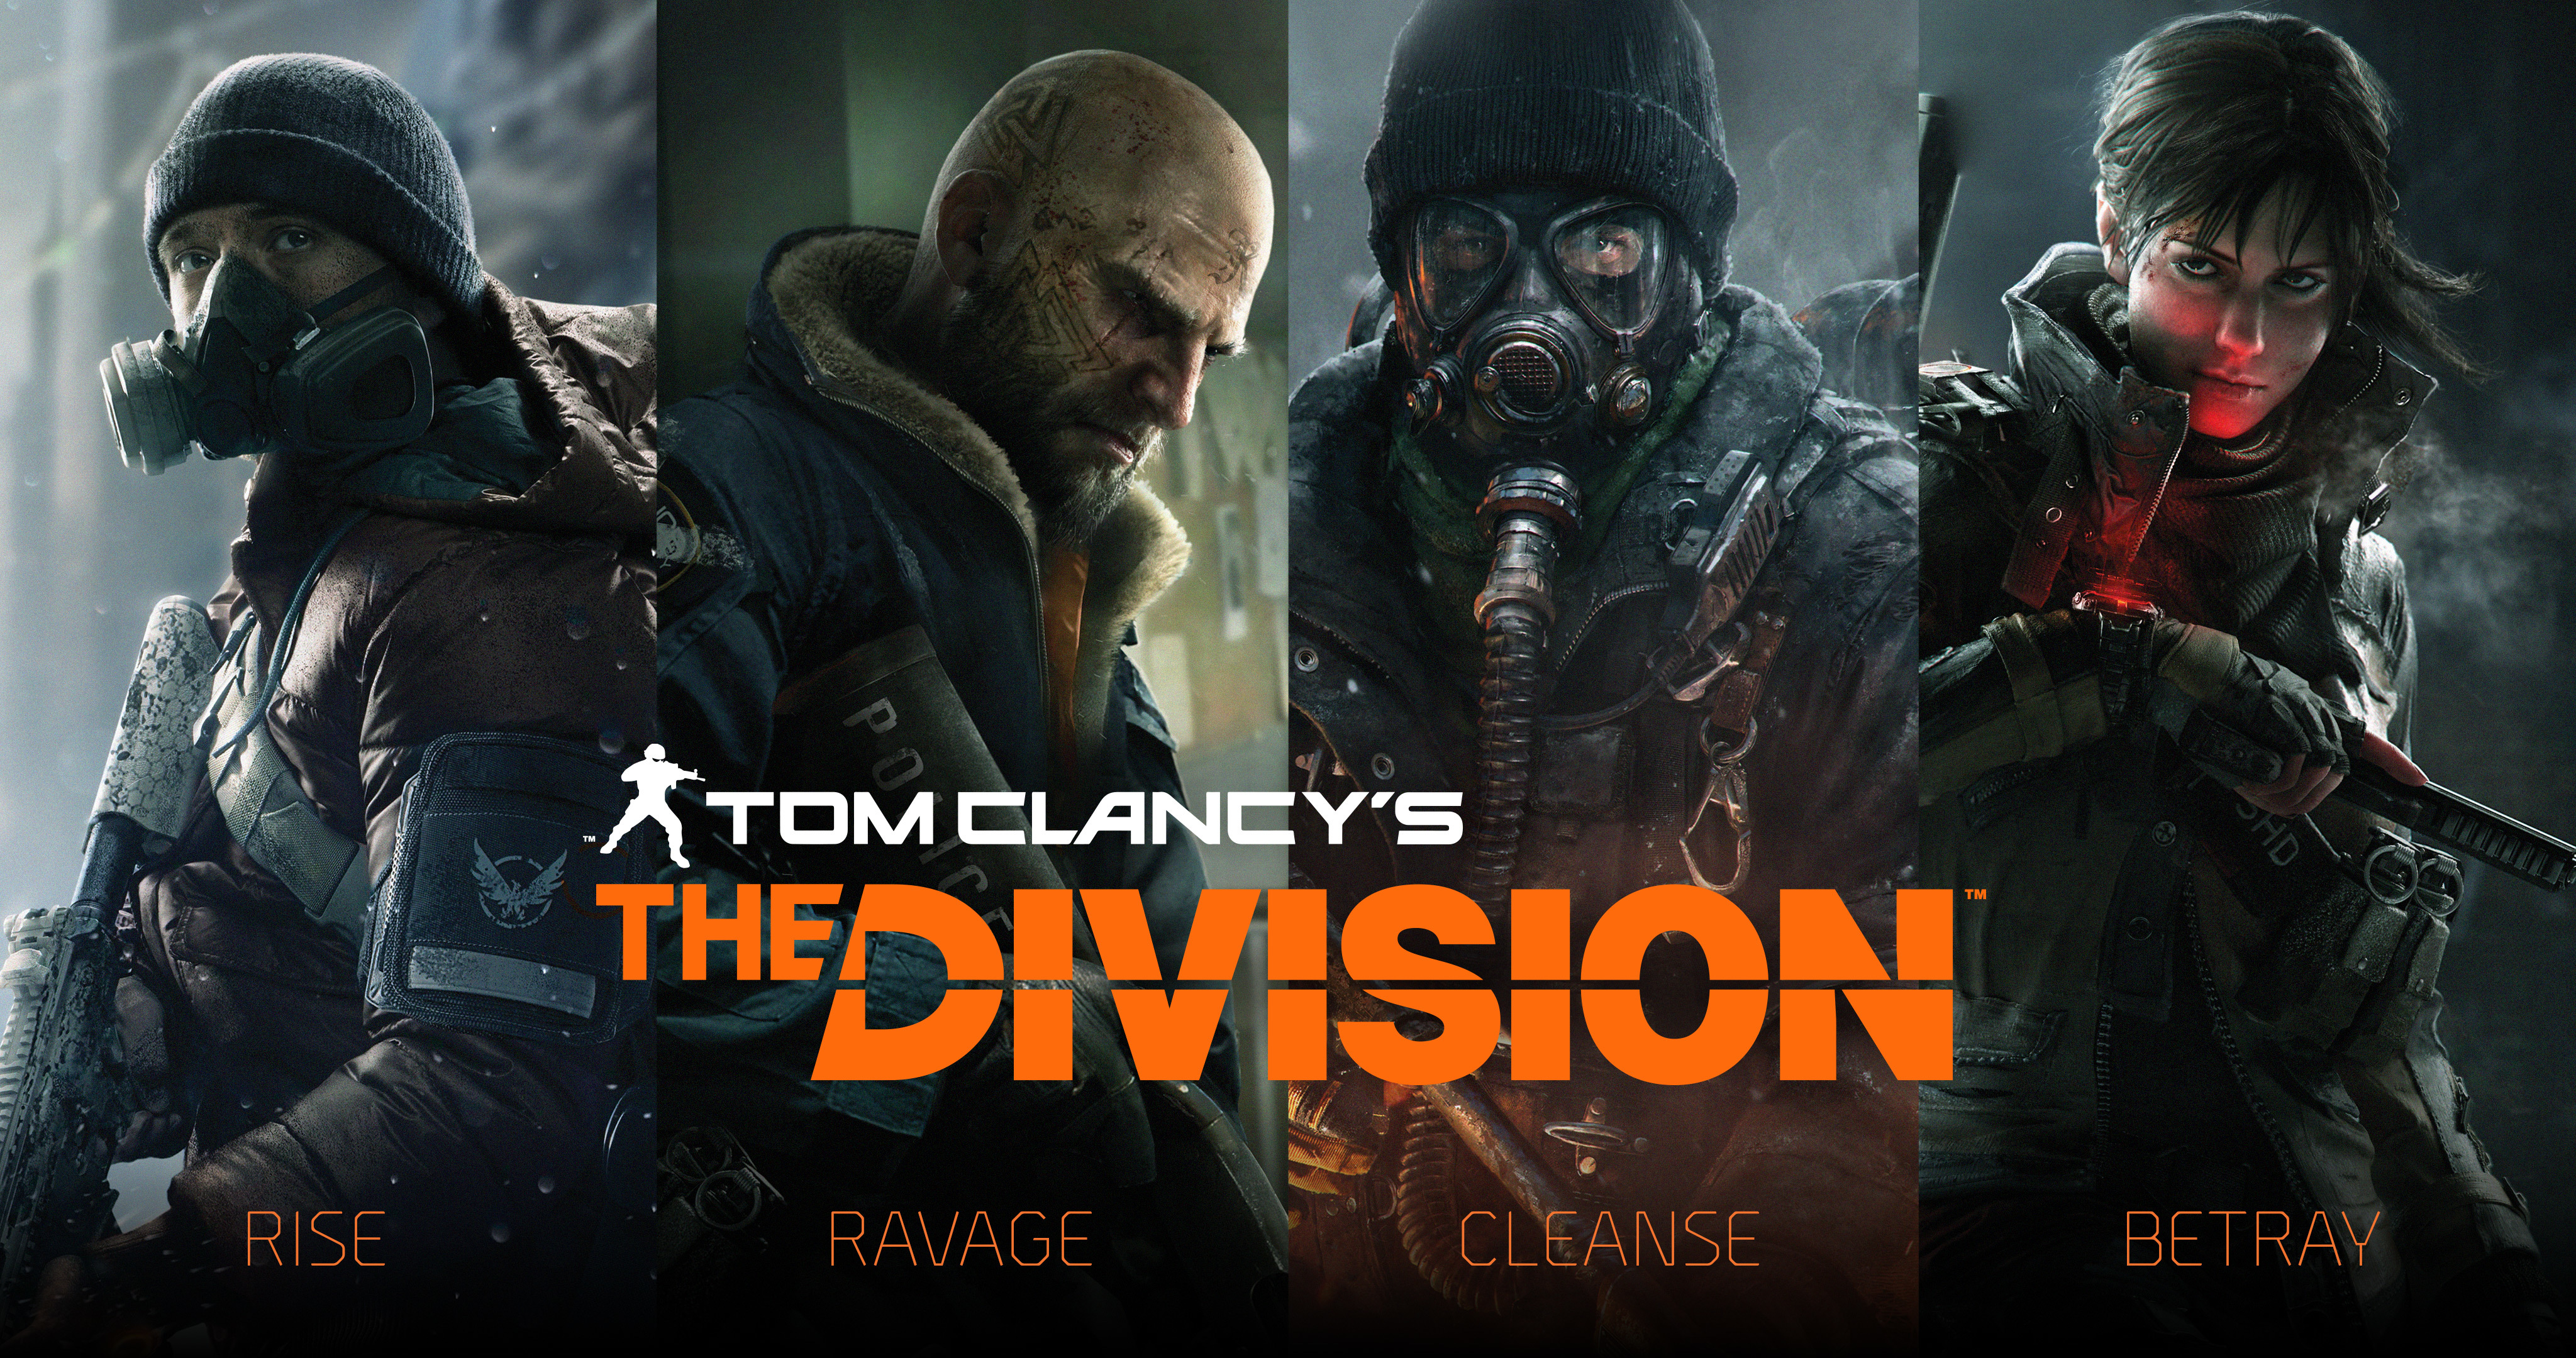 Game posters. Tom Clancy’s the Division 2. Tom Clancy's Division Постер. Tom Clancy's the Division 2 Постер. Tom Clancy's 2018.